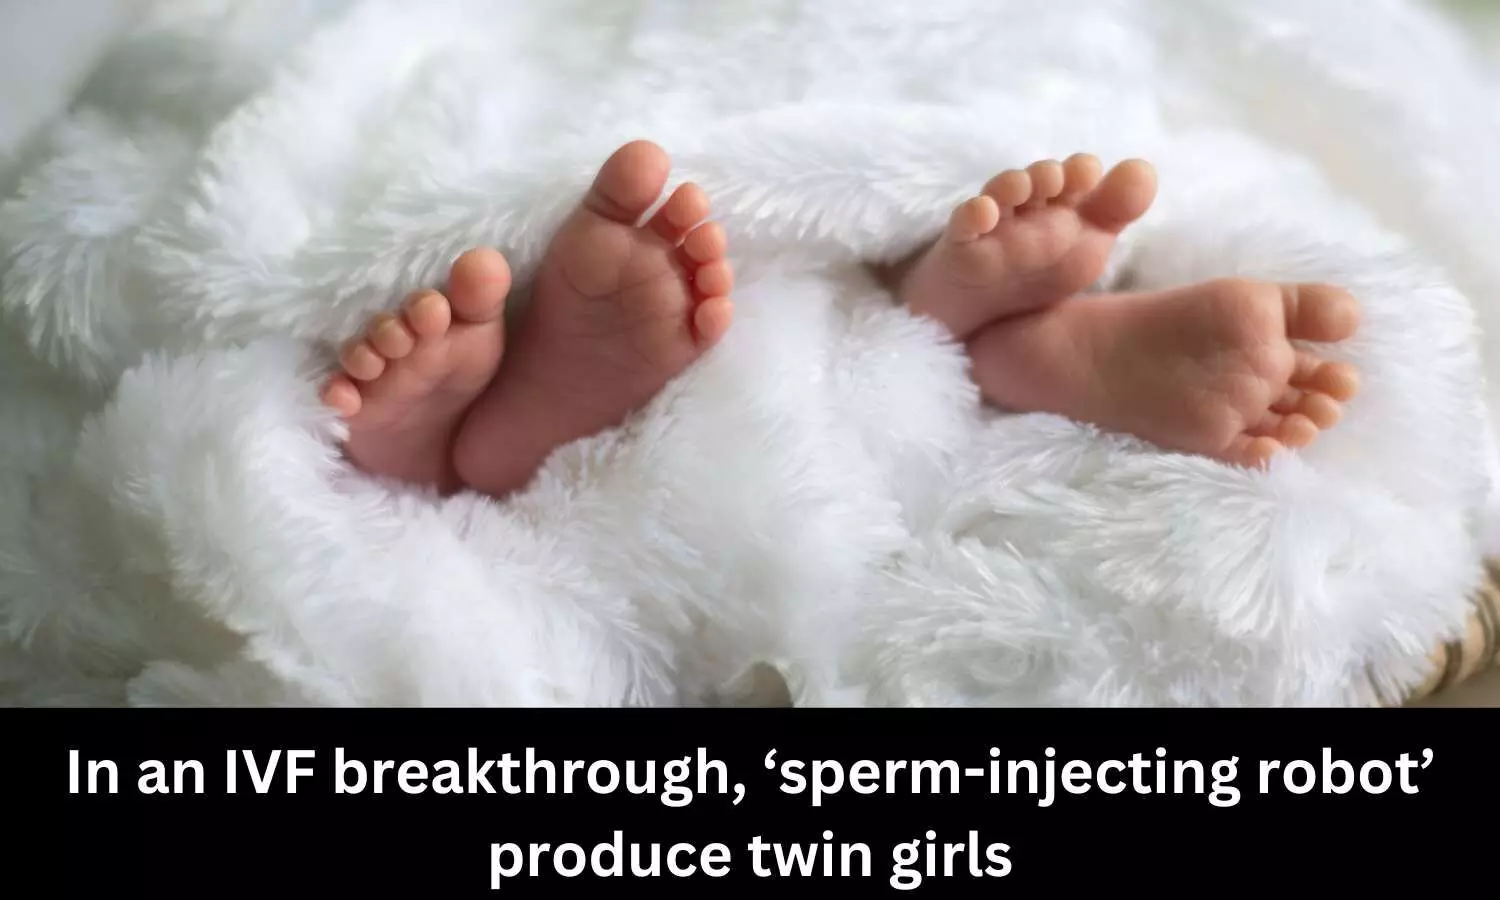 In an IVF breakthrough, sperm-injecting robot produce twin girls